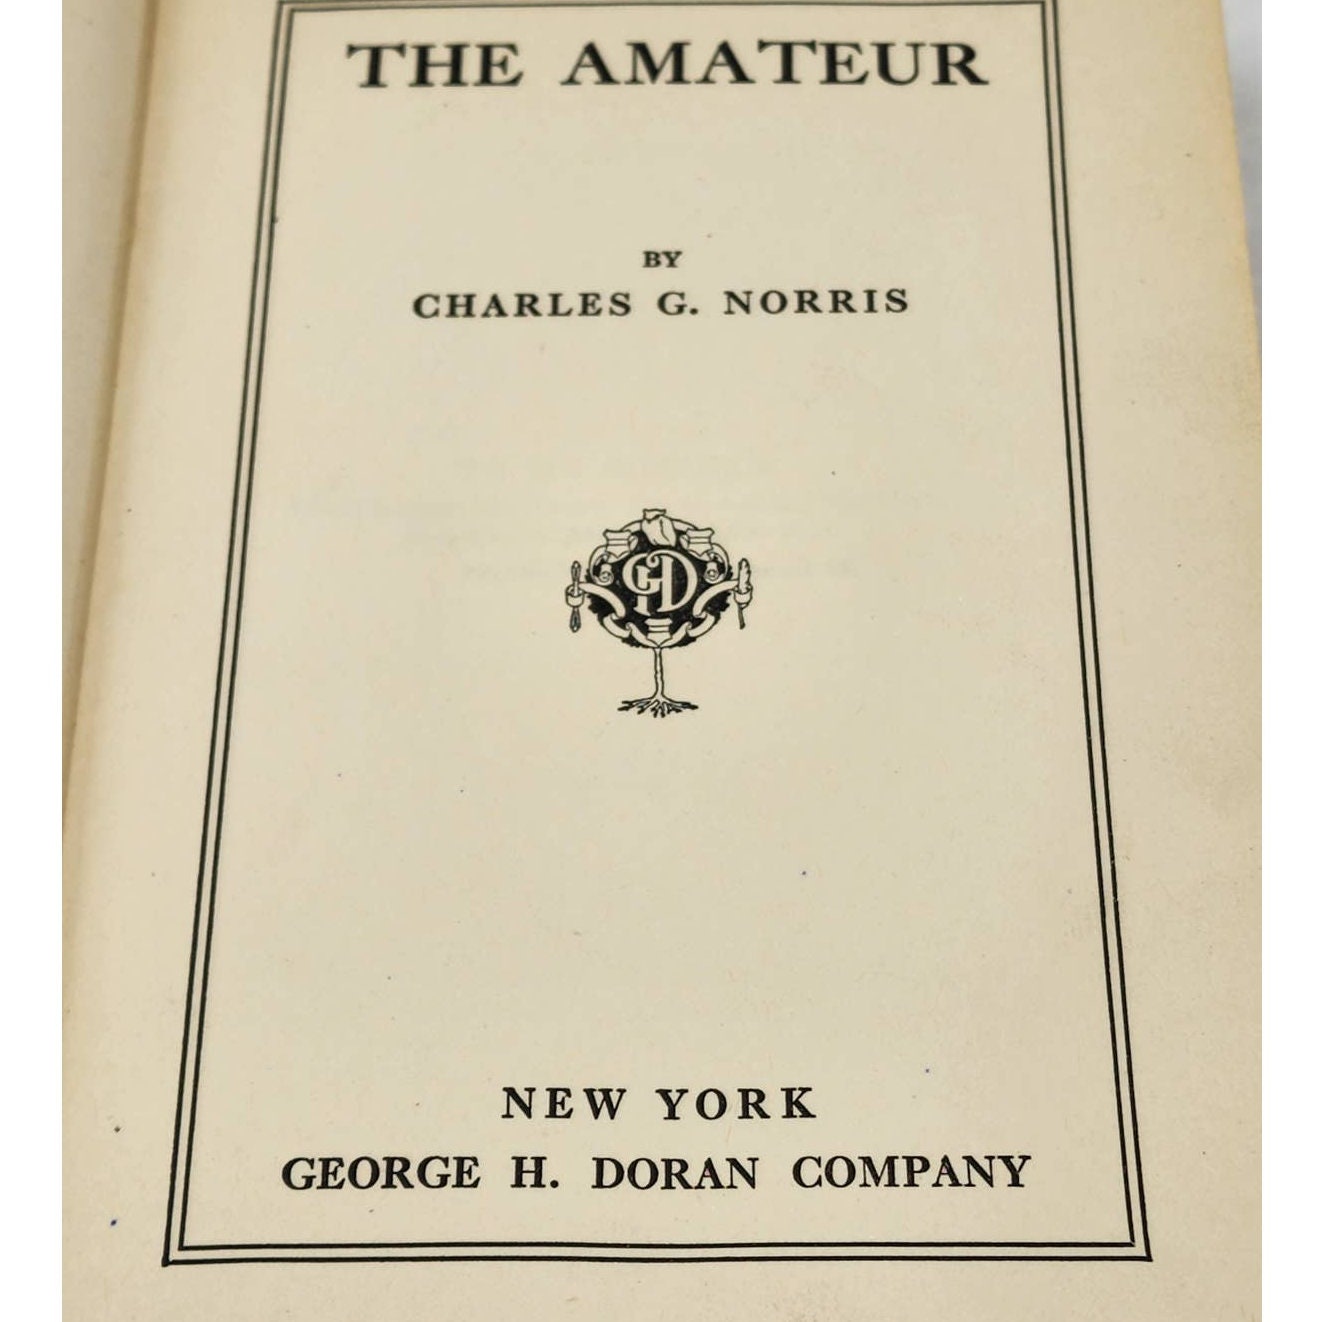 The Amateur by Charles G